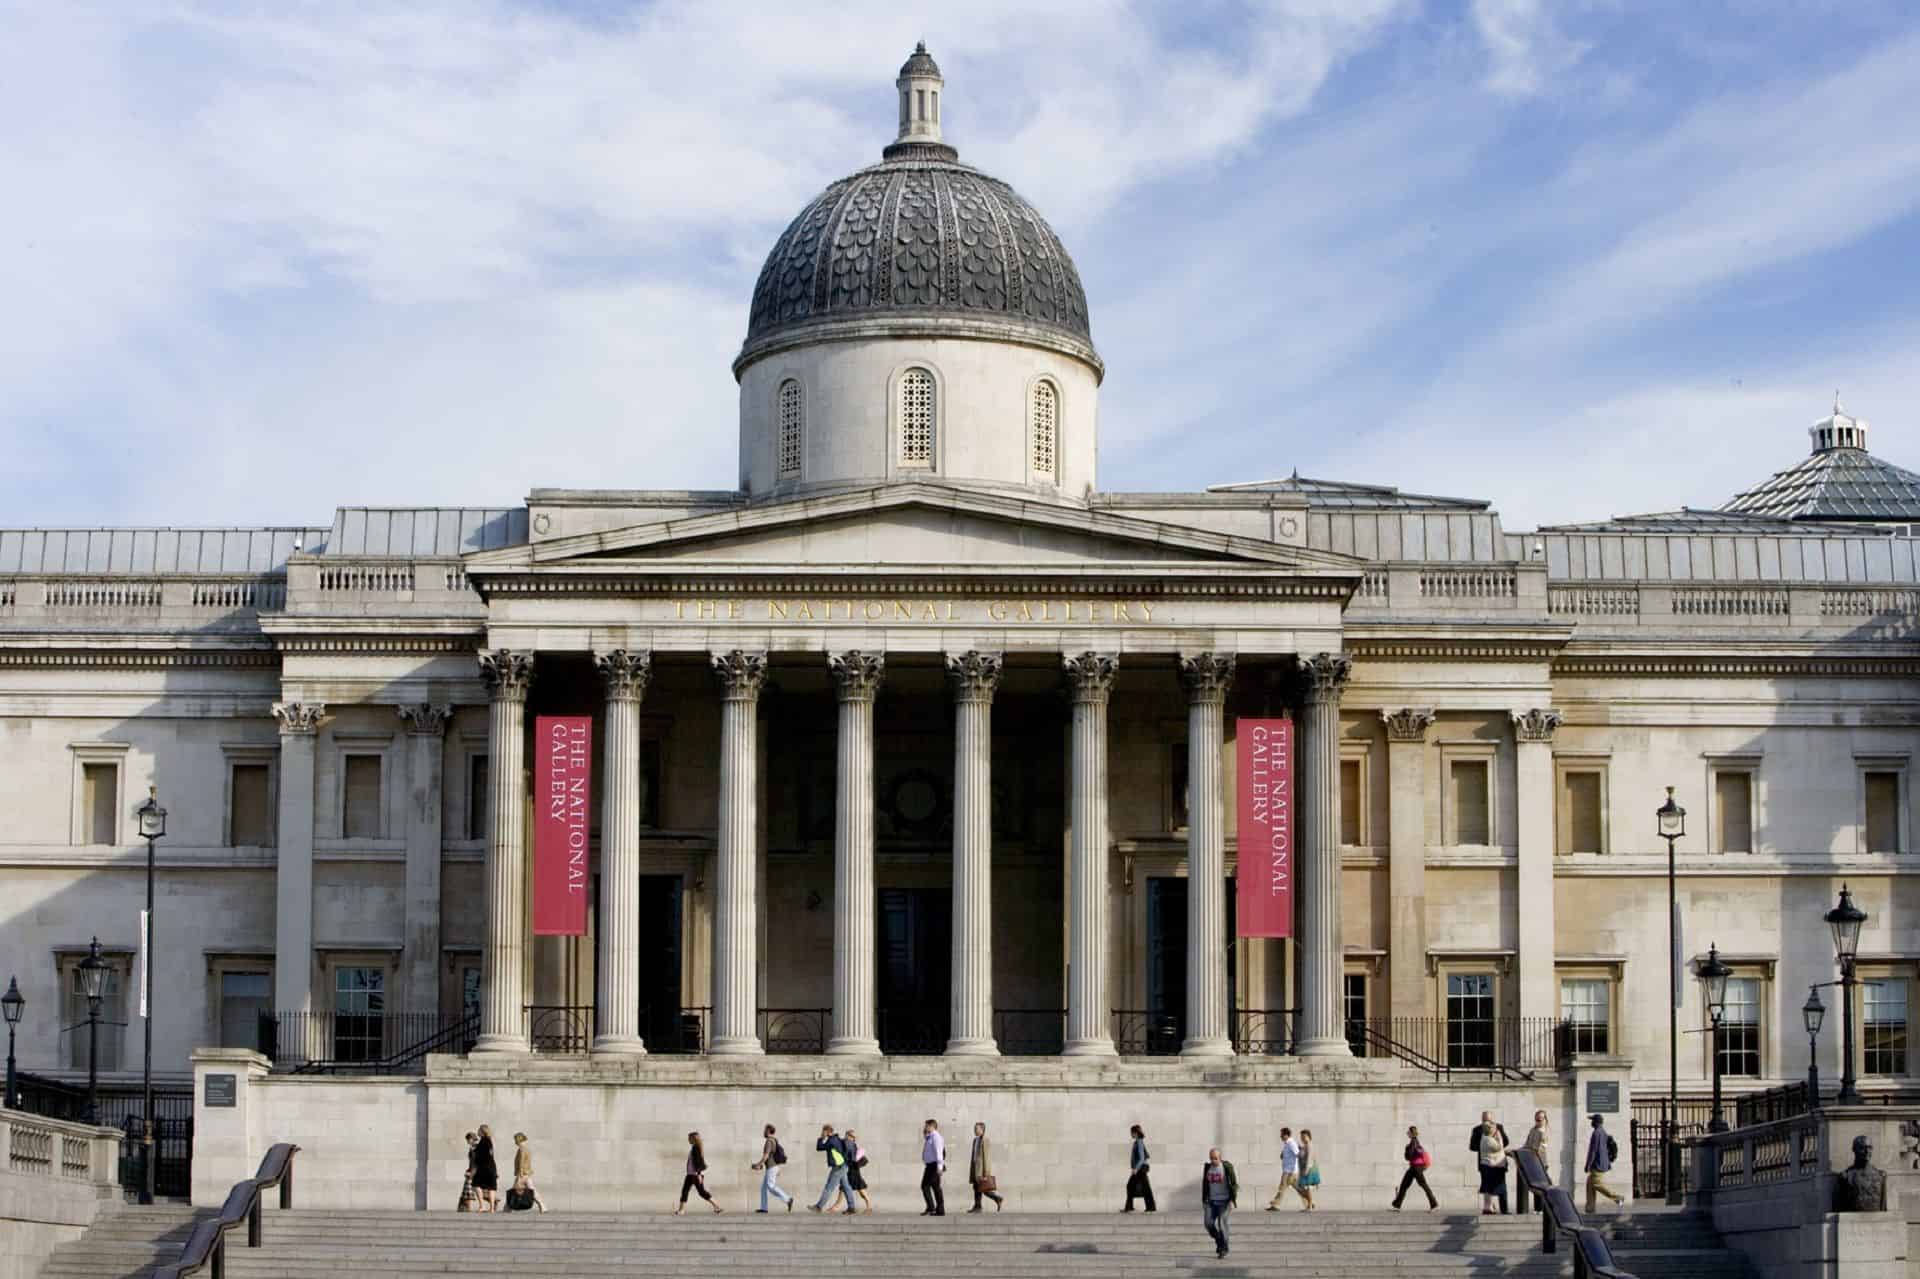 The National Gallery in UK